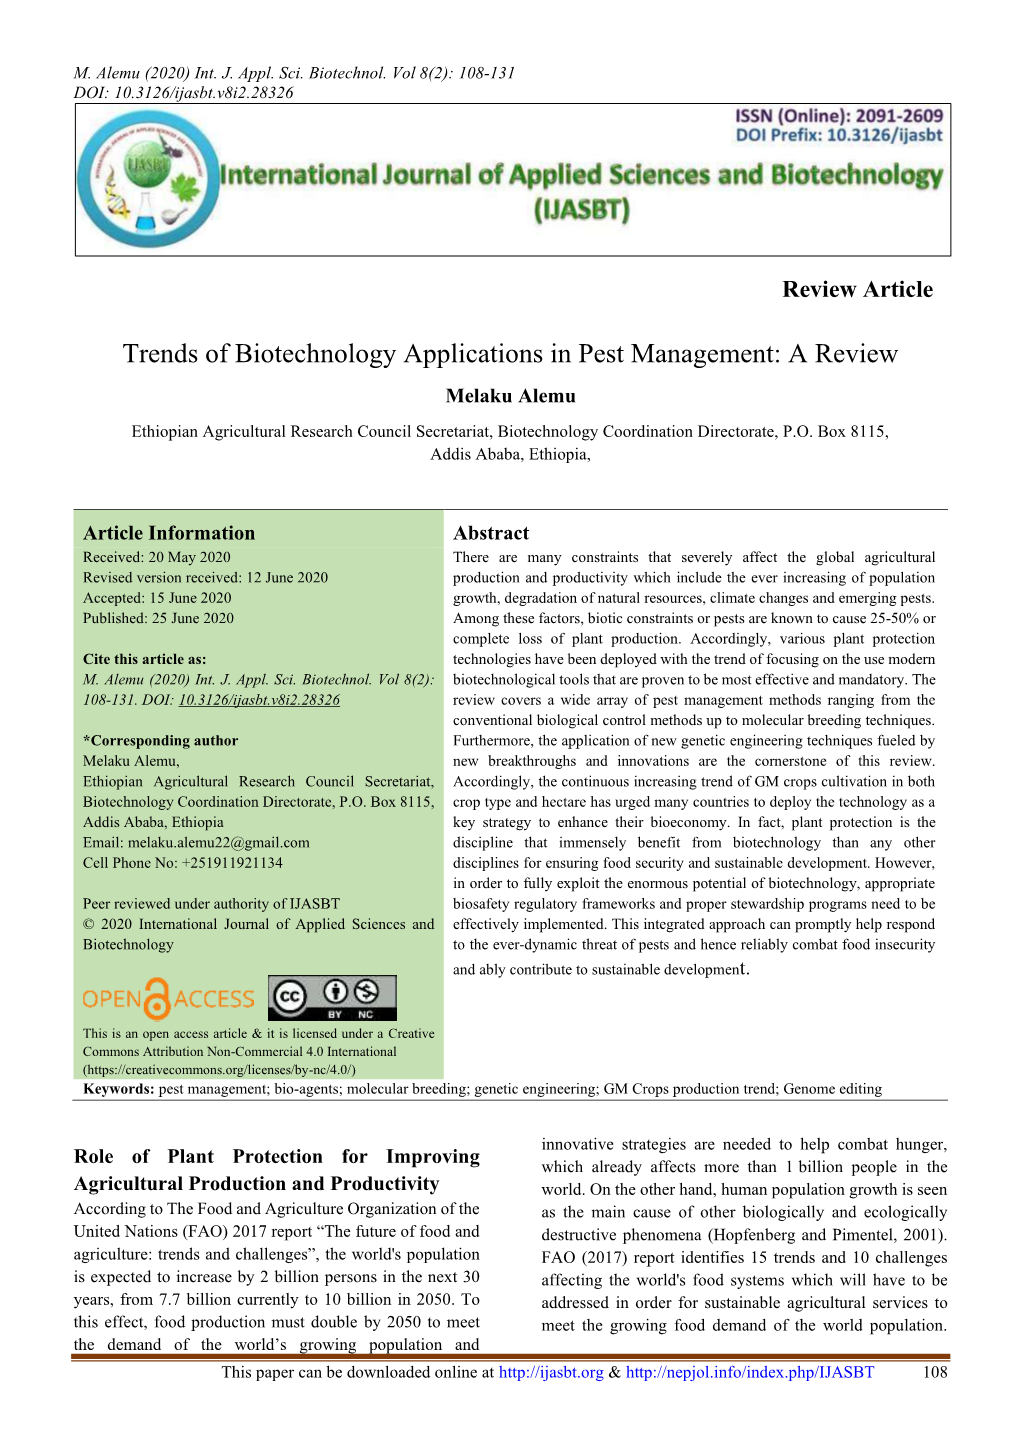 Trends of Biotechnology Applications in Pest